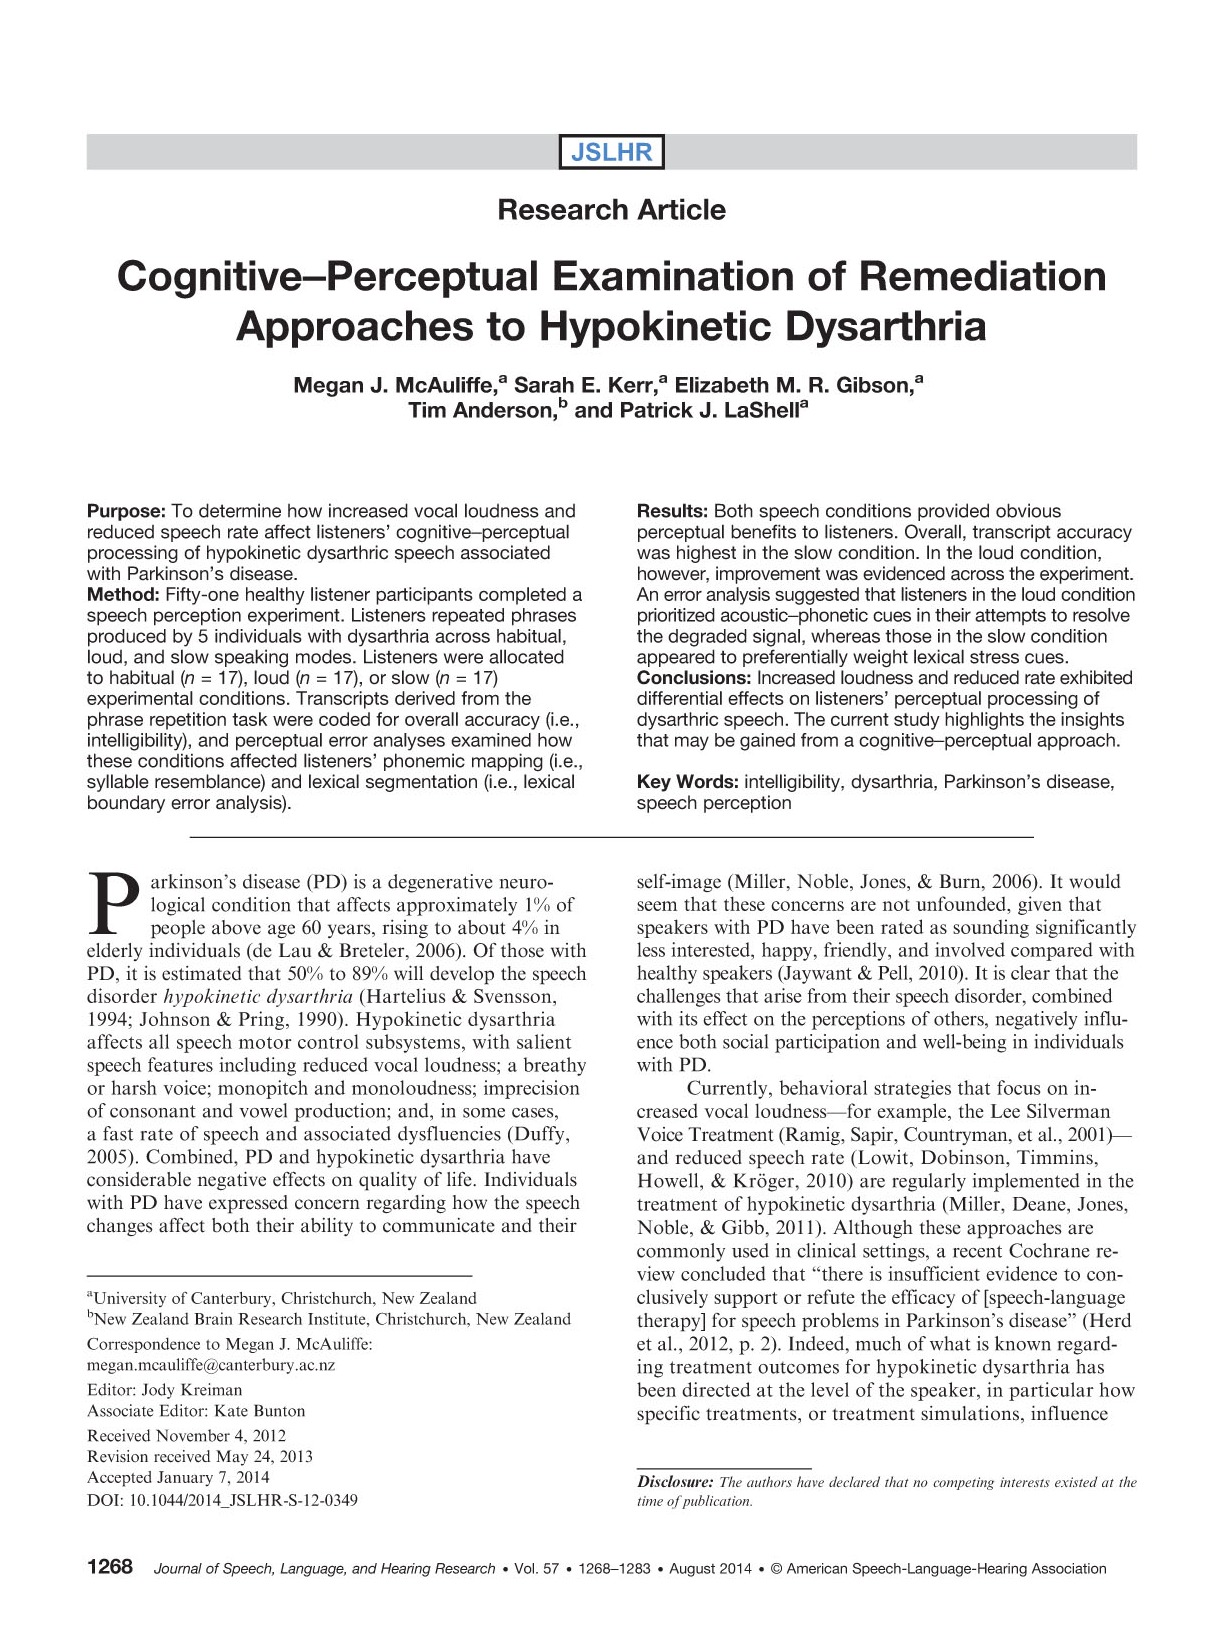 Download Cognitive-perceptual examination of remediation approaches to hypokinetic dysarthria.